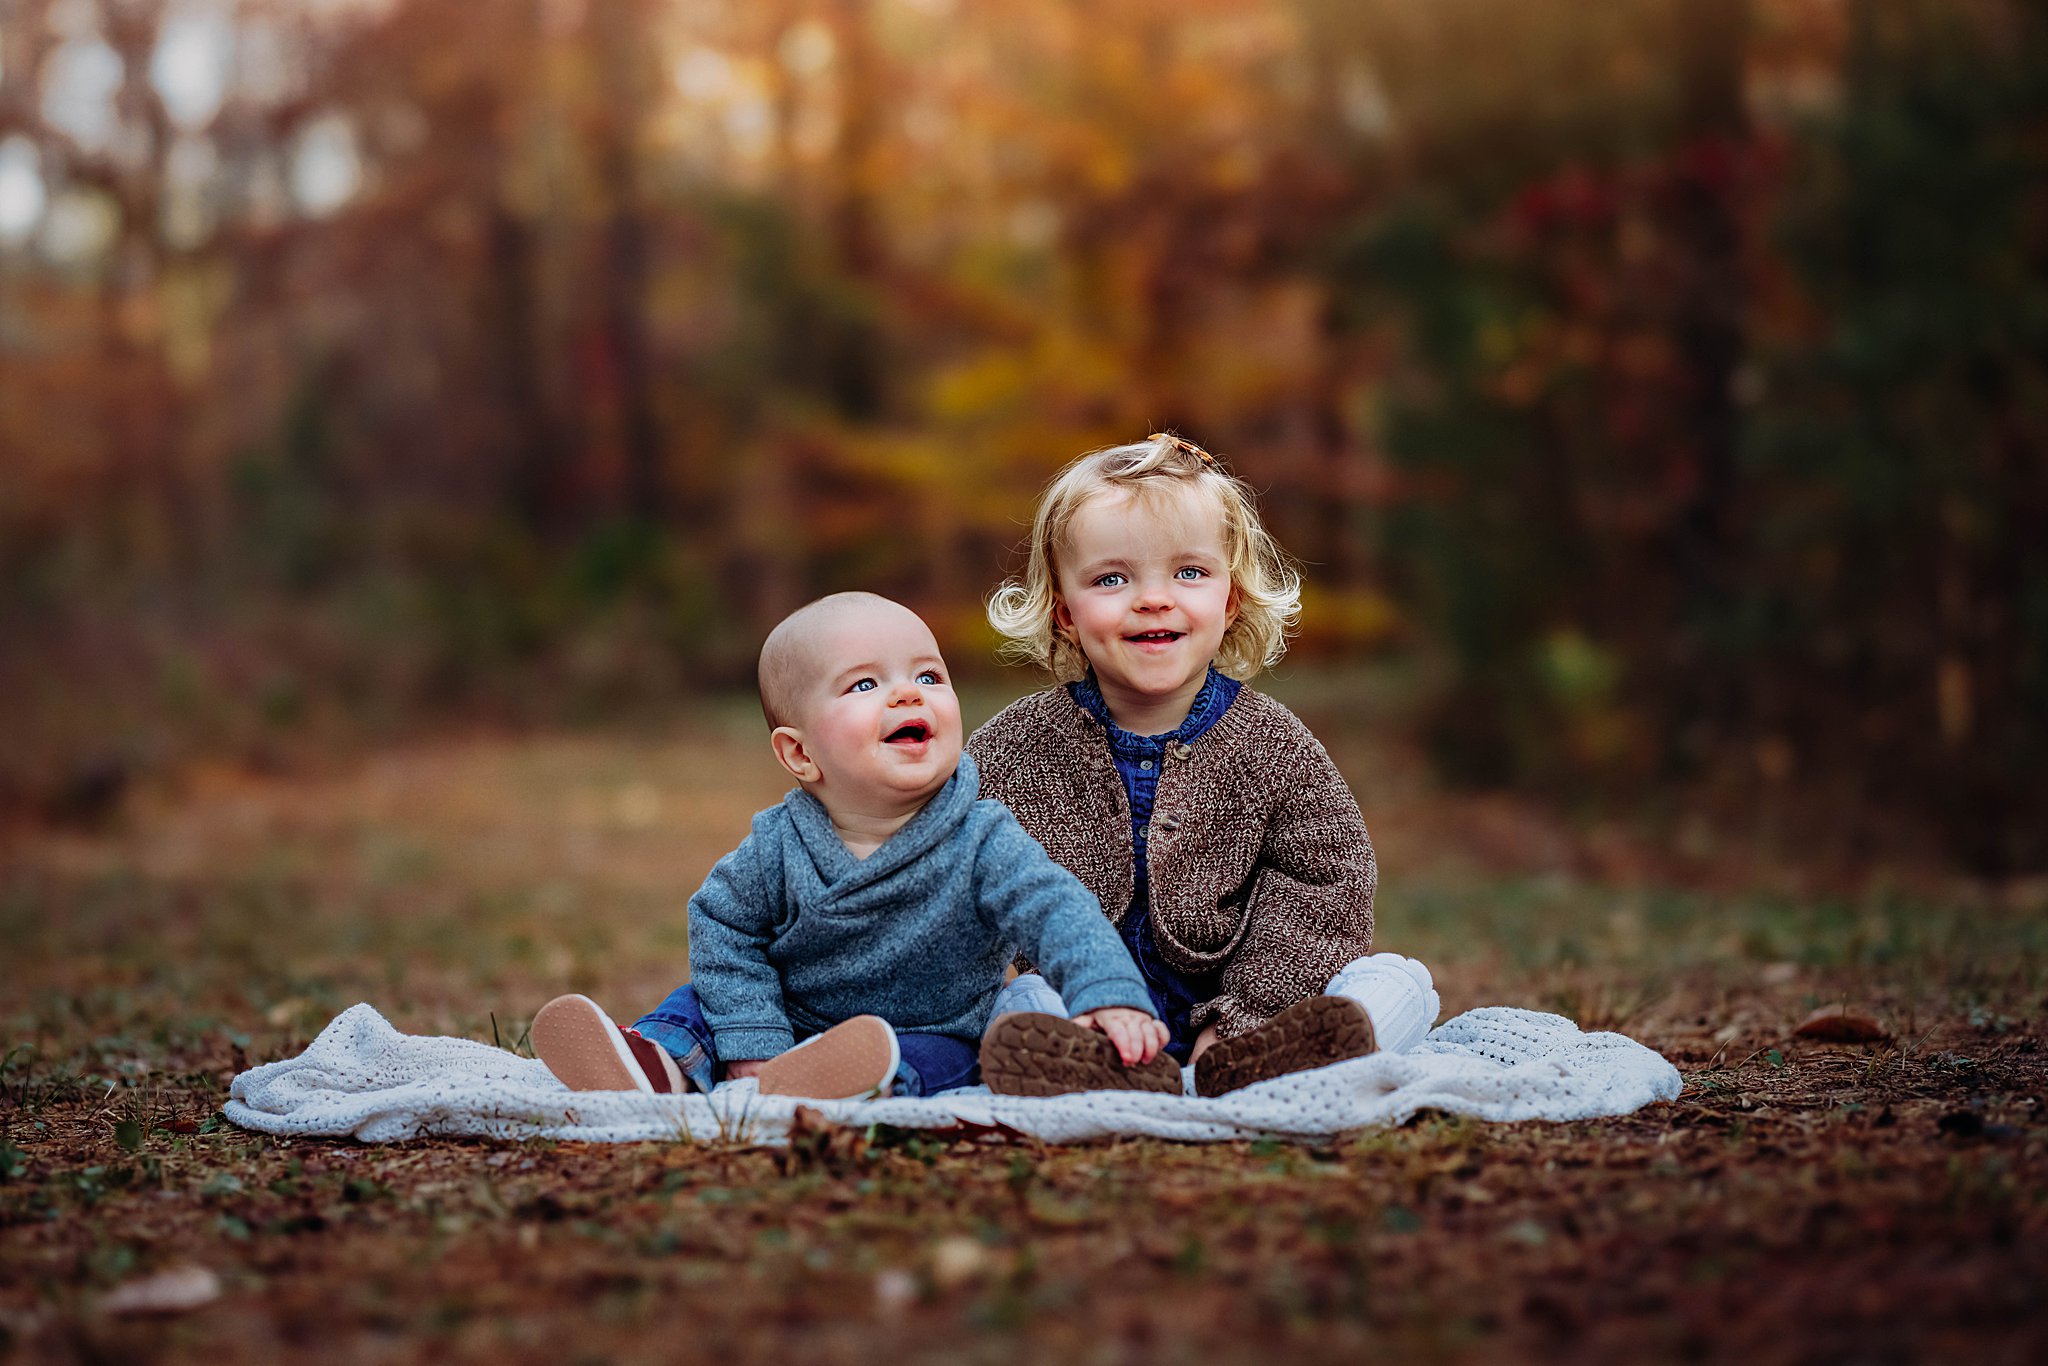 Two sibling sit together on a blanket in a park in sweaters